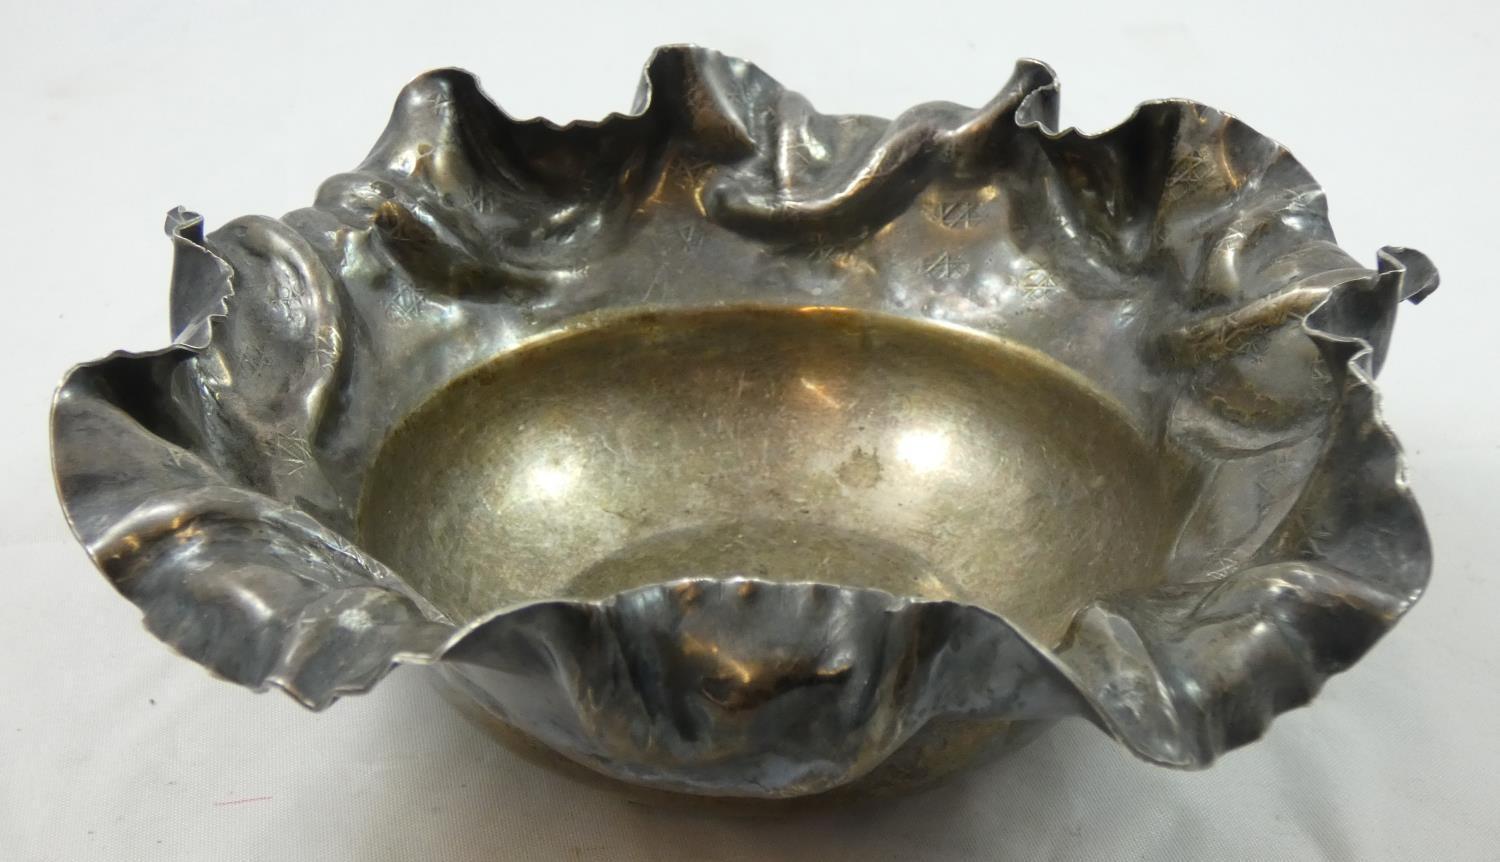 A continental silver bowl, stamped 925, with folded border, diameter 17 cm, weight 7.5 oz.